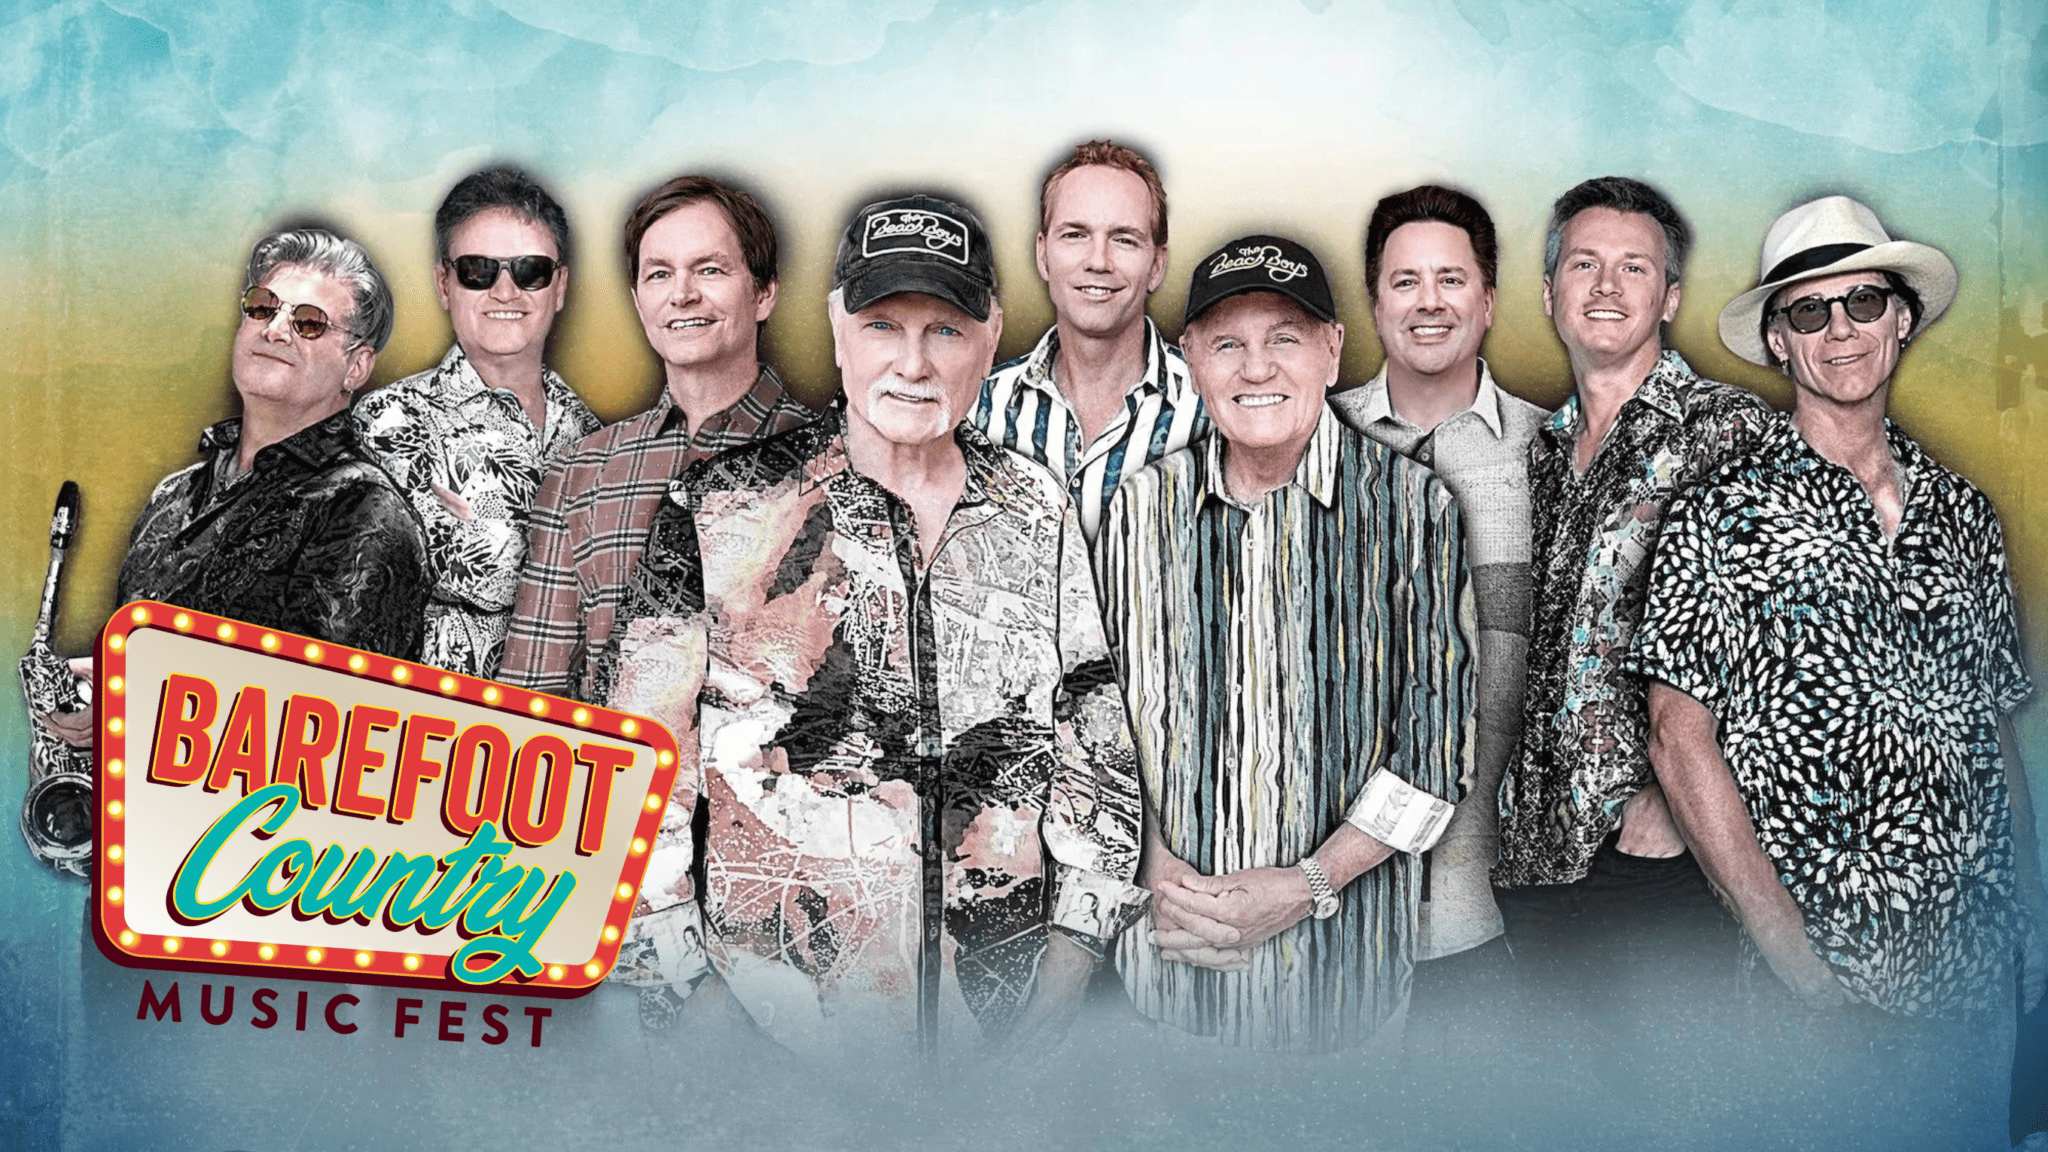 The Beach Boys Are Coming to The Barefoot Country Music Fest Wildwood